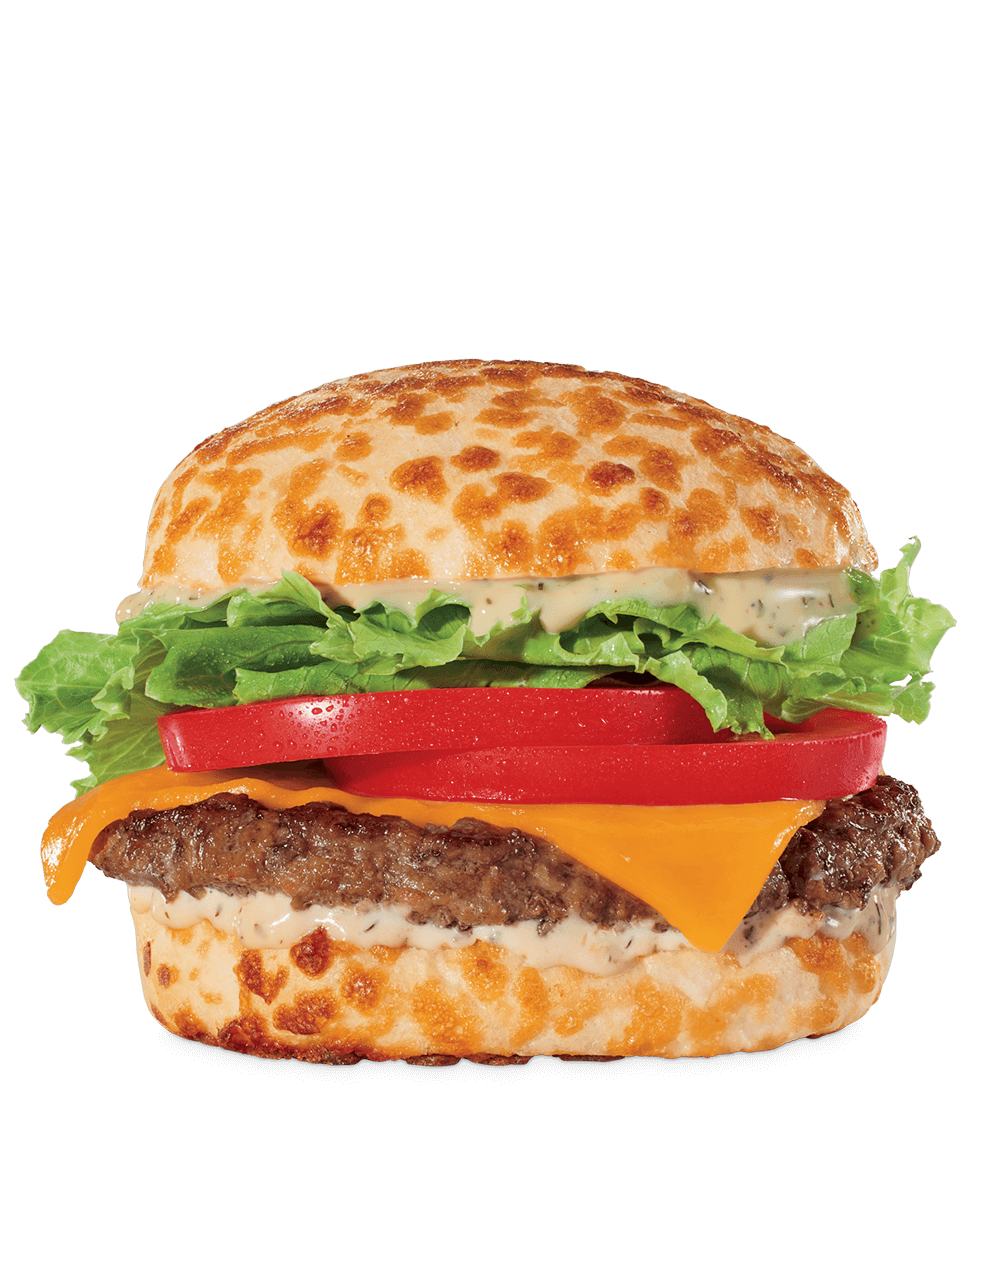 Jack in the Box Cheddar Loaded Cheeseburger Nutrition Facts